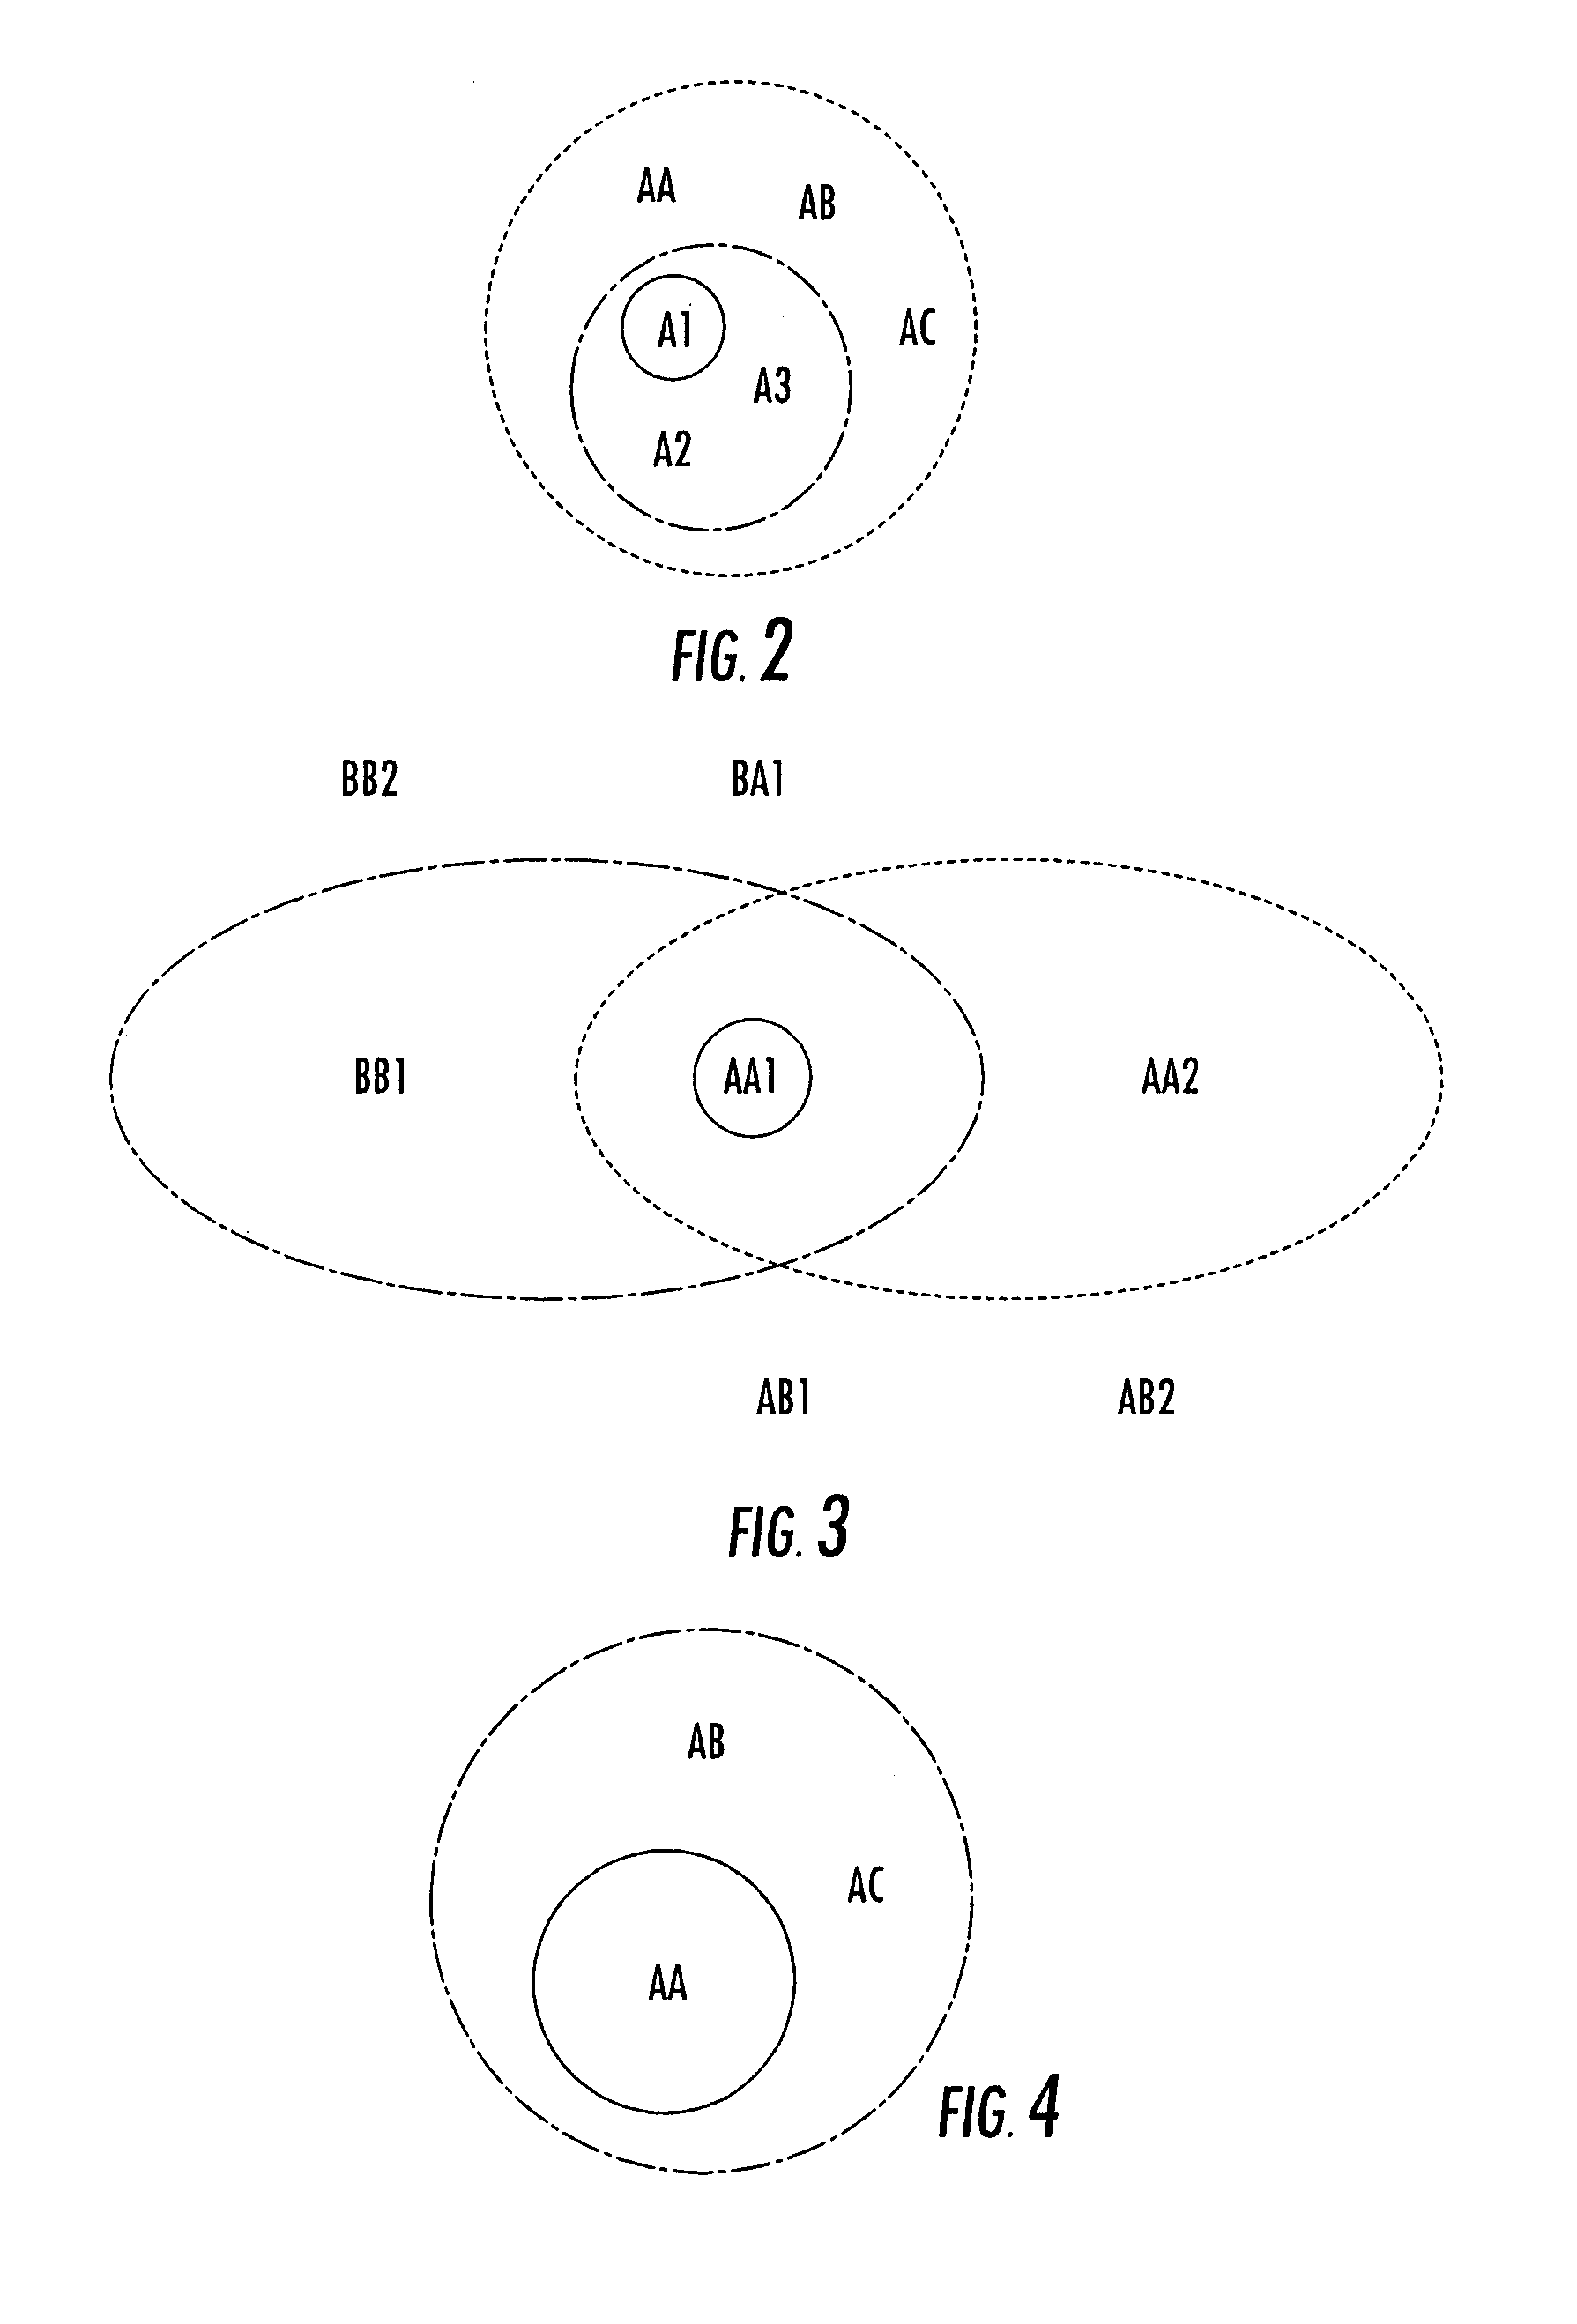 Method for determining relevance to customers of an advertisement for retail grocery items offered by a retailer